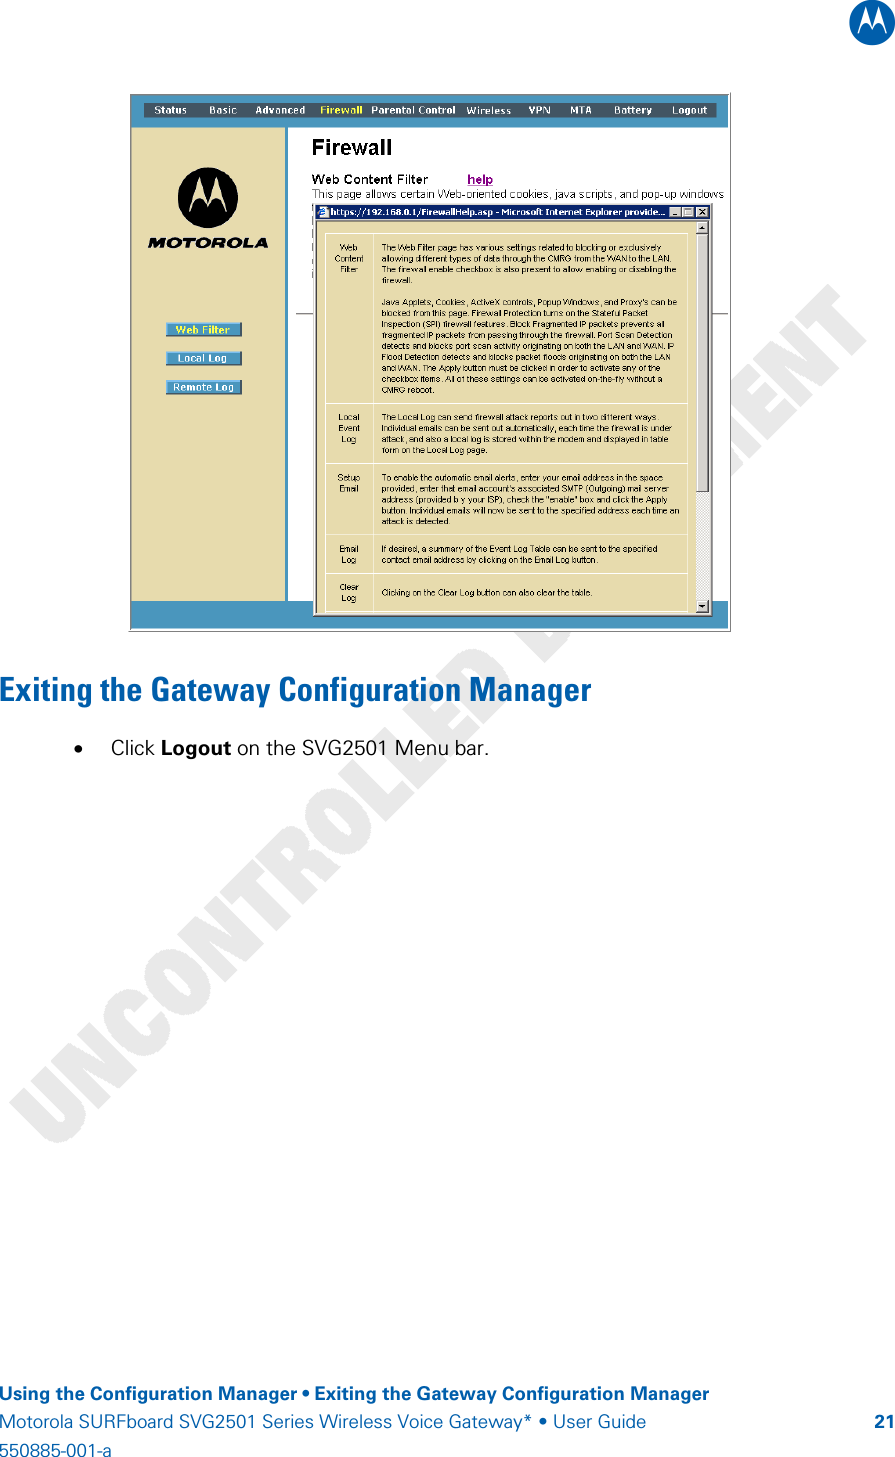 B    Using the Configuration Manager • Exiting the Gateway Configuration Manager Motorola SURFboard SVG2501 Series Wireless Voice Gateway* • User Guide  21550885-001-a    Exiting the Gateway Configuration Manager • Click Logout on the SVG2501 Menu bar.   